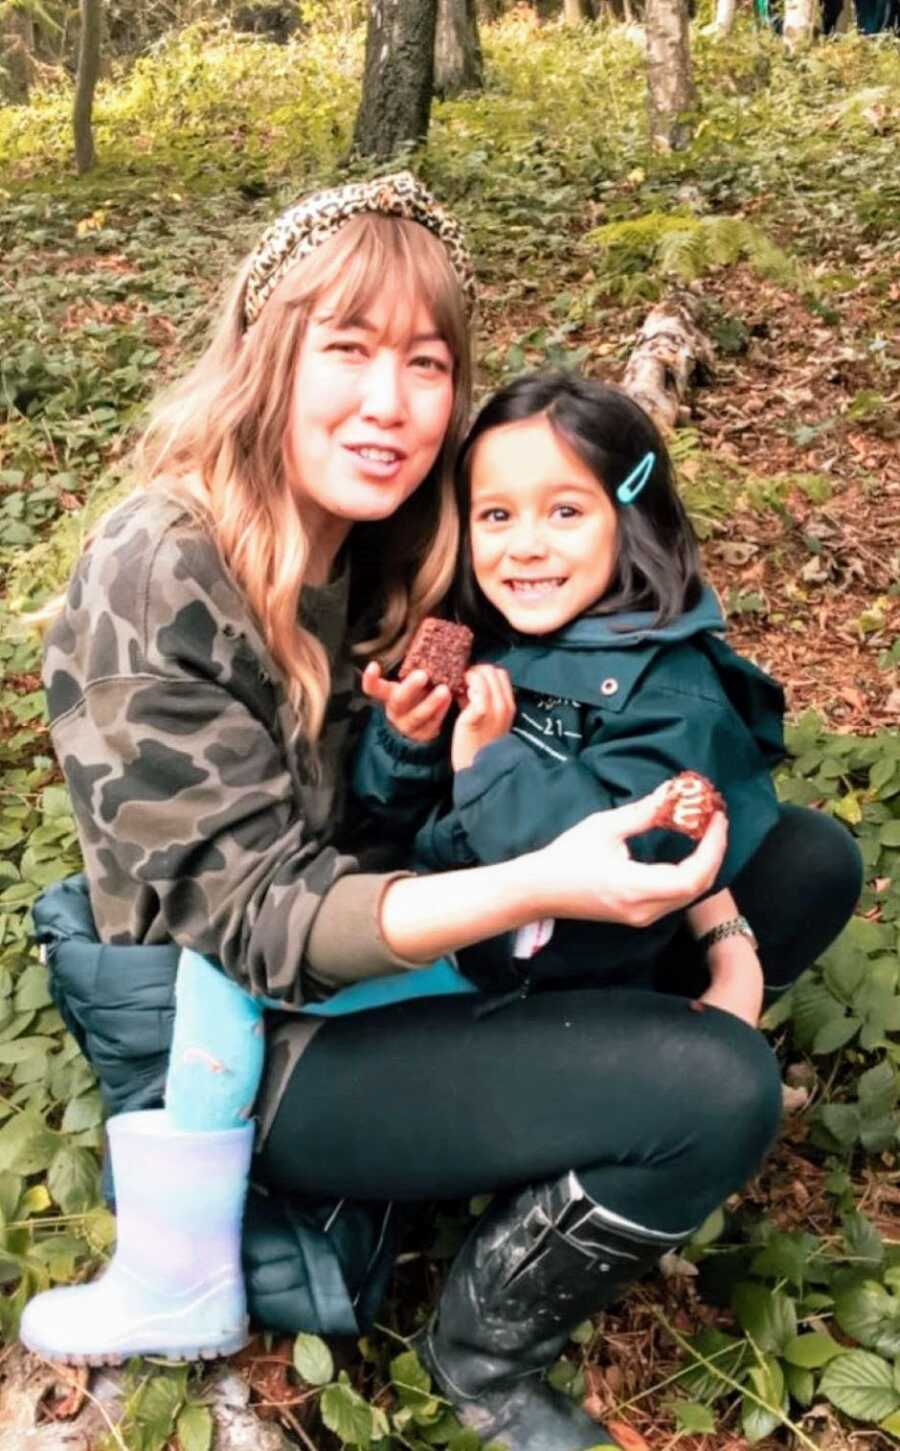 Mom and daughter take a break on a hike to eat a snack together in the woods